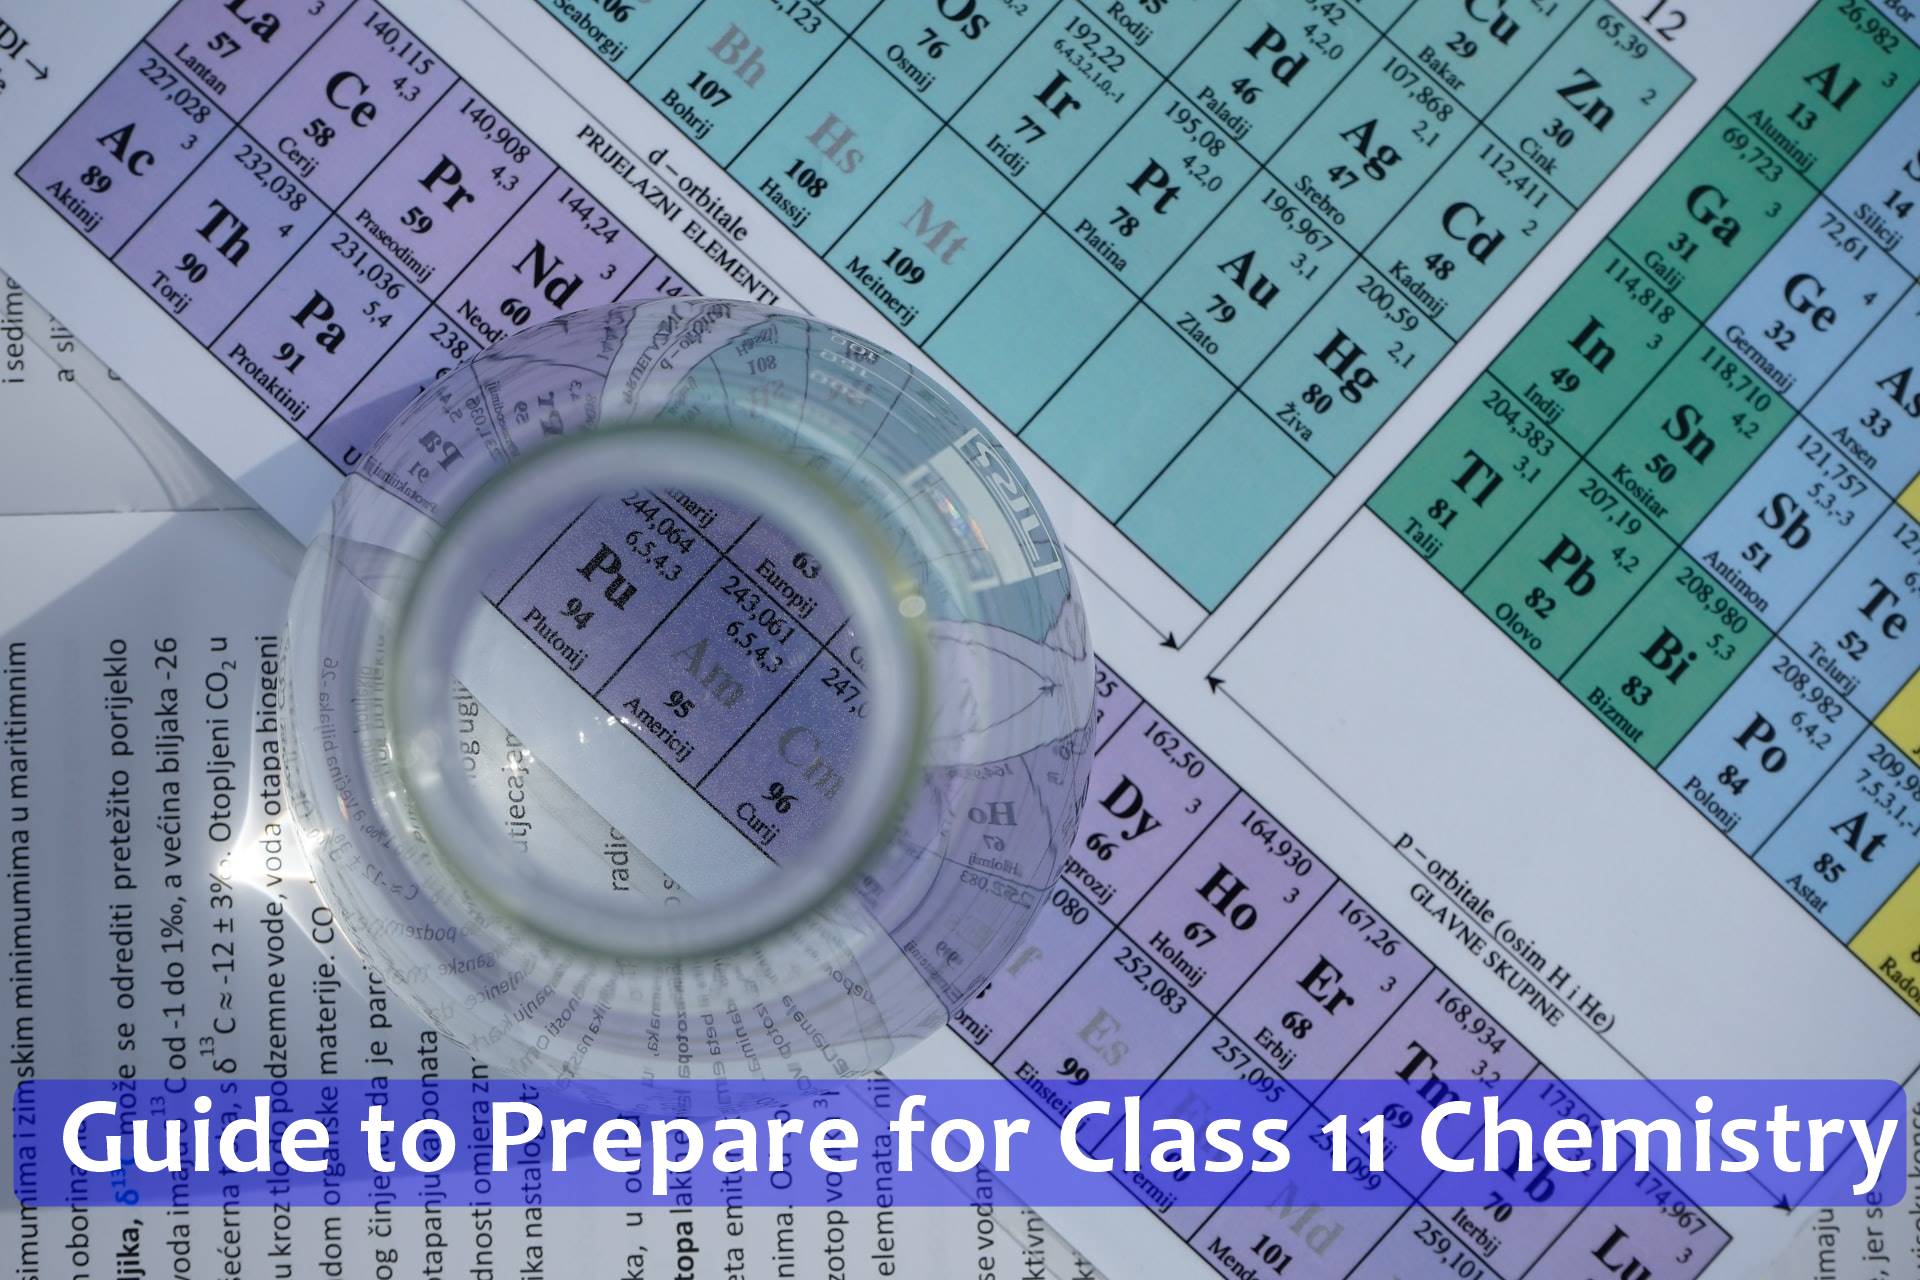 Guide to Prepare for Class 11 Chemistry